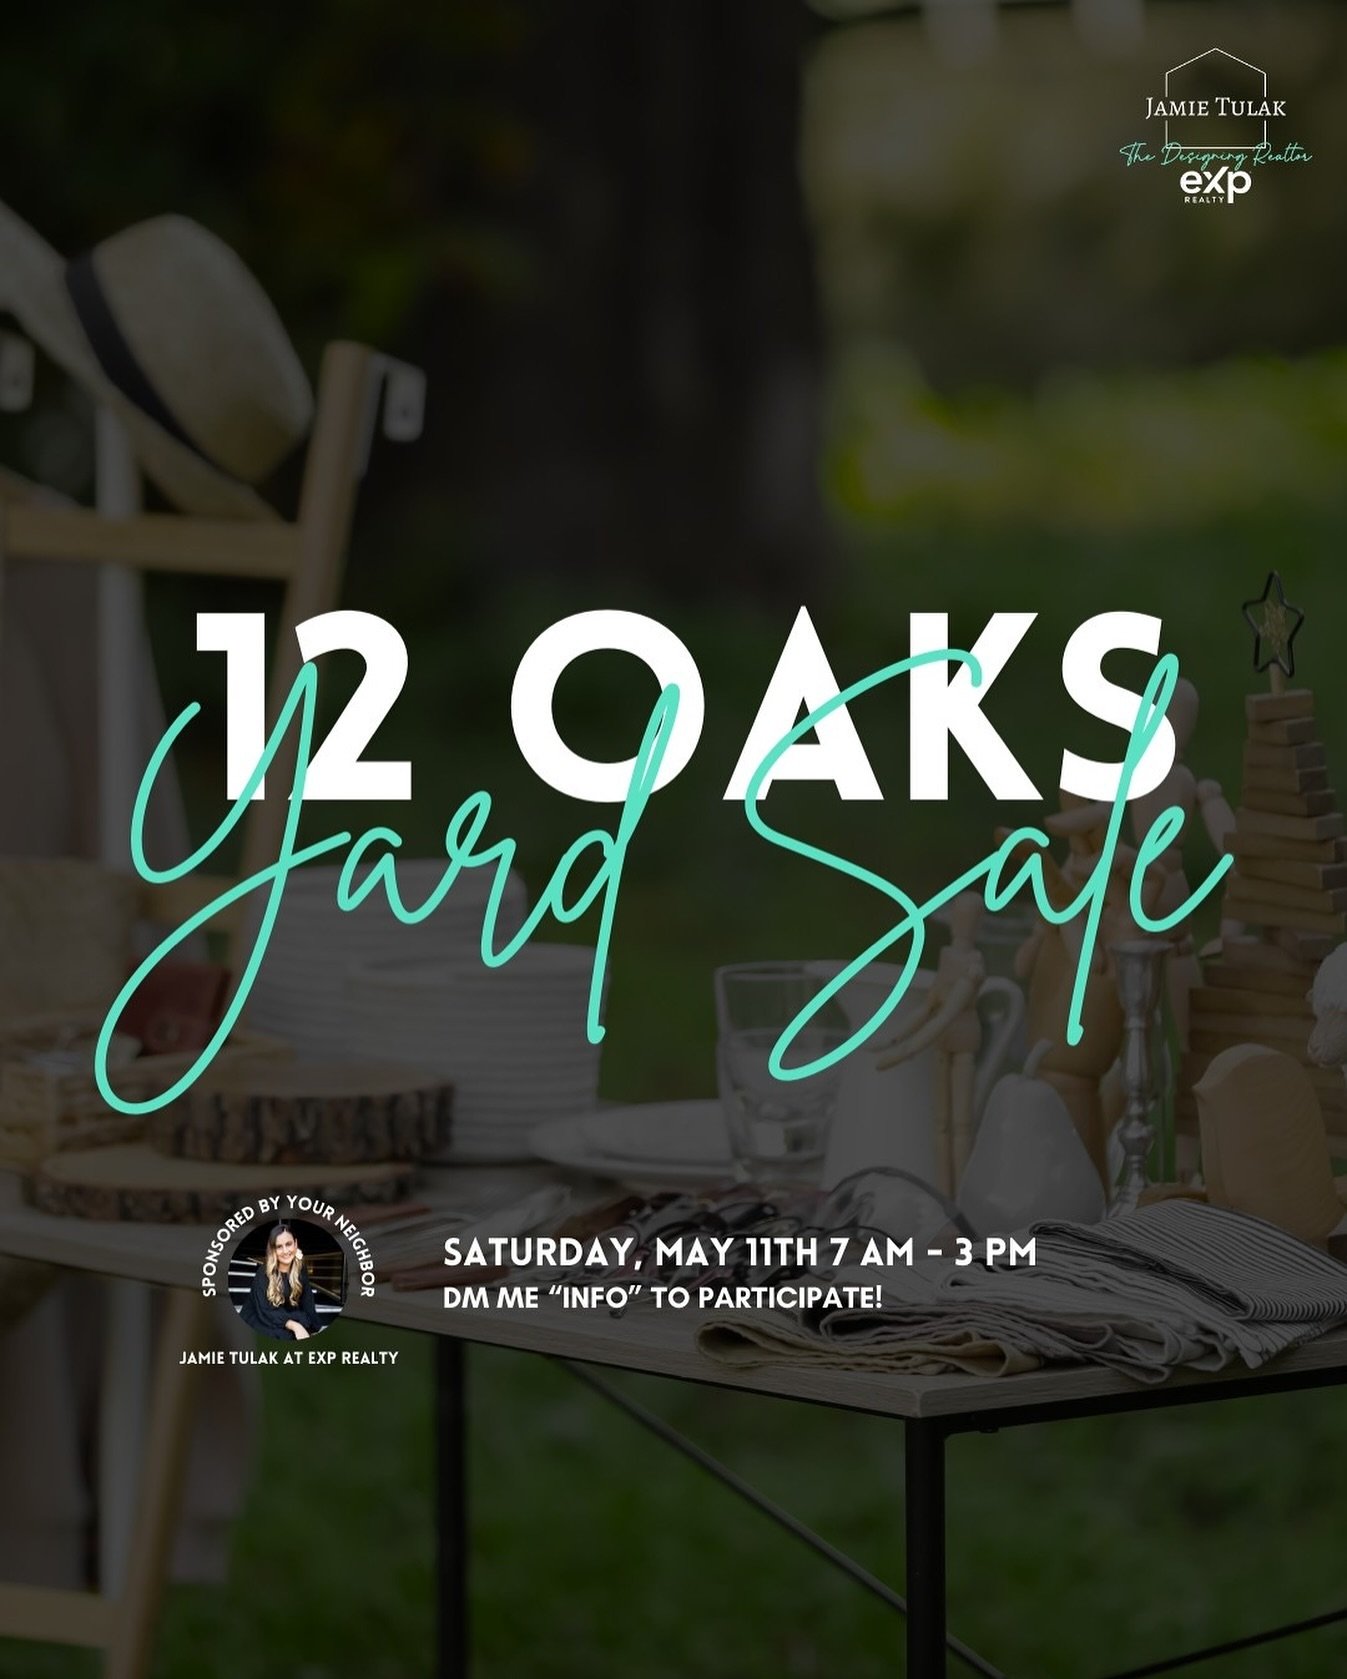 Oh neighbors, I&rsquo;ve got something for you! It&rsquo;s that time of the year! 

It&rsquo;s time to finally get to that spring cleaning and get rid of those things that have just been sitting around in your garage. 

I&rsquo;m hosting the annual ?